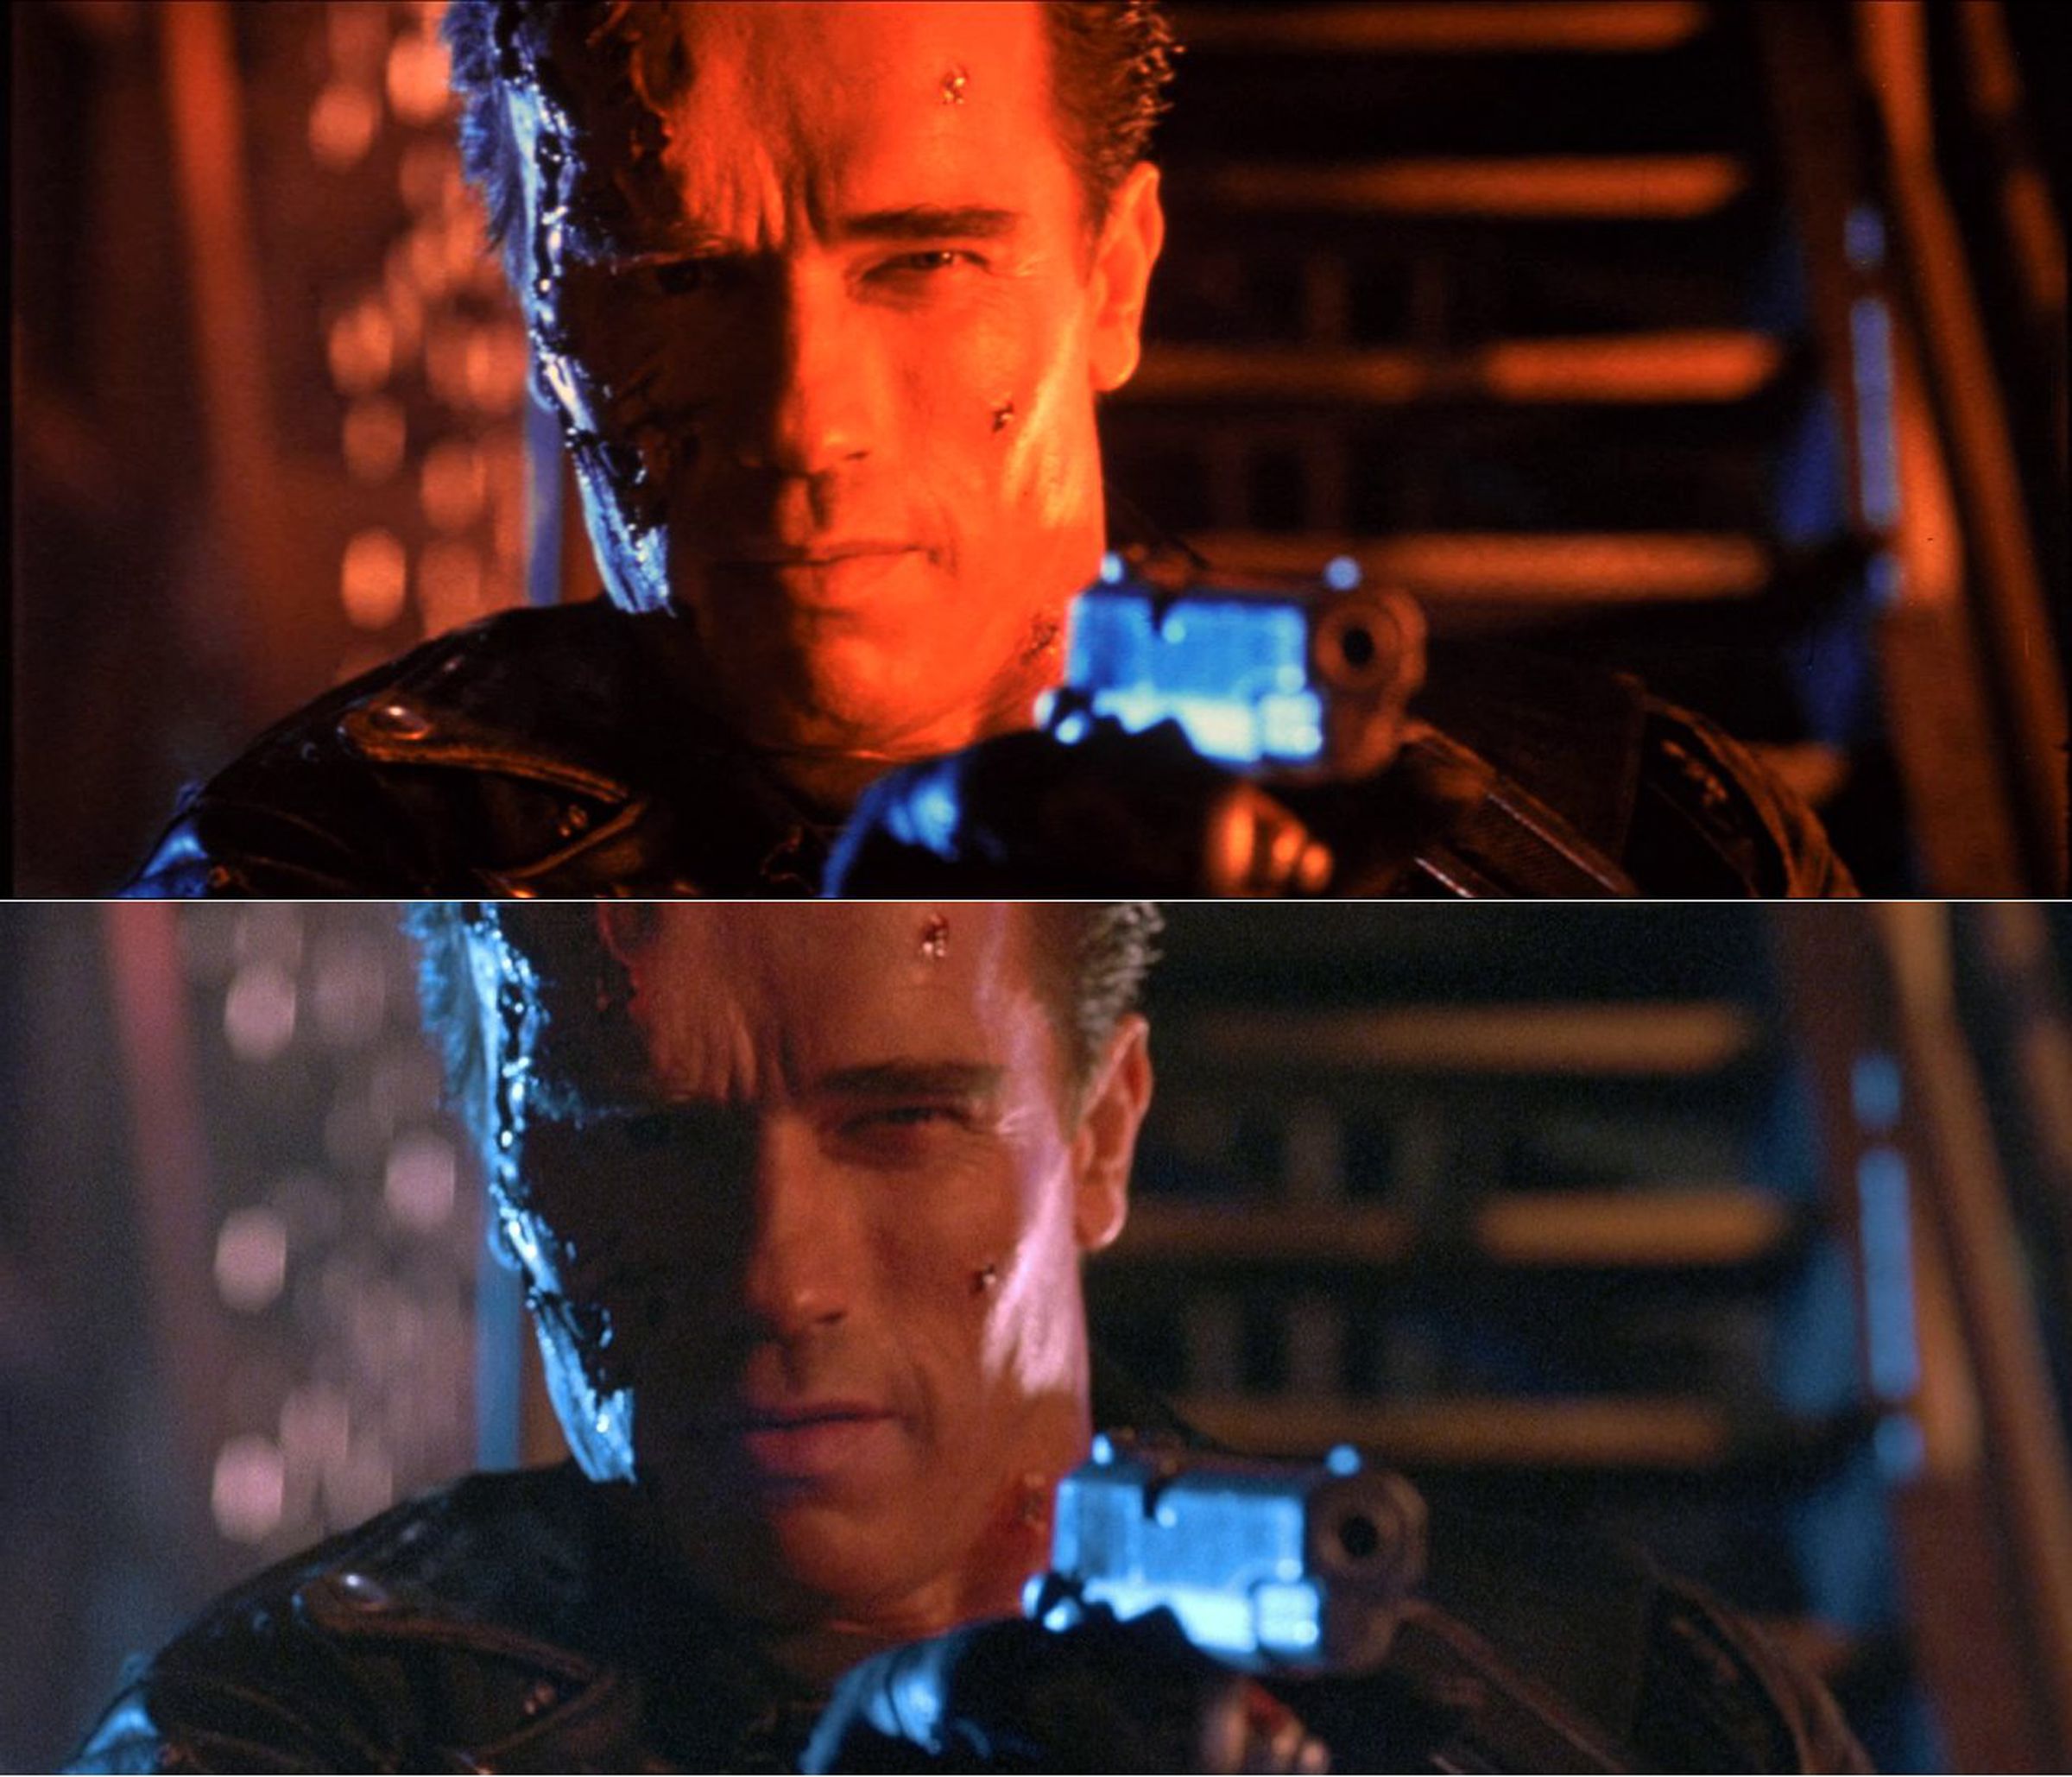 Another comparison, this one showing Arnold Schwarzenegger facing the camera with a gun pointed just to the right of our viewpoint. In the fan restoration (top) he is very orange, while in the Blu-ray version, his natural skintone appears to be used.